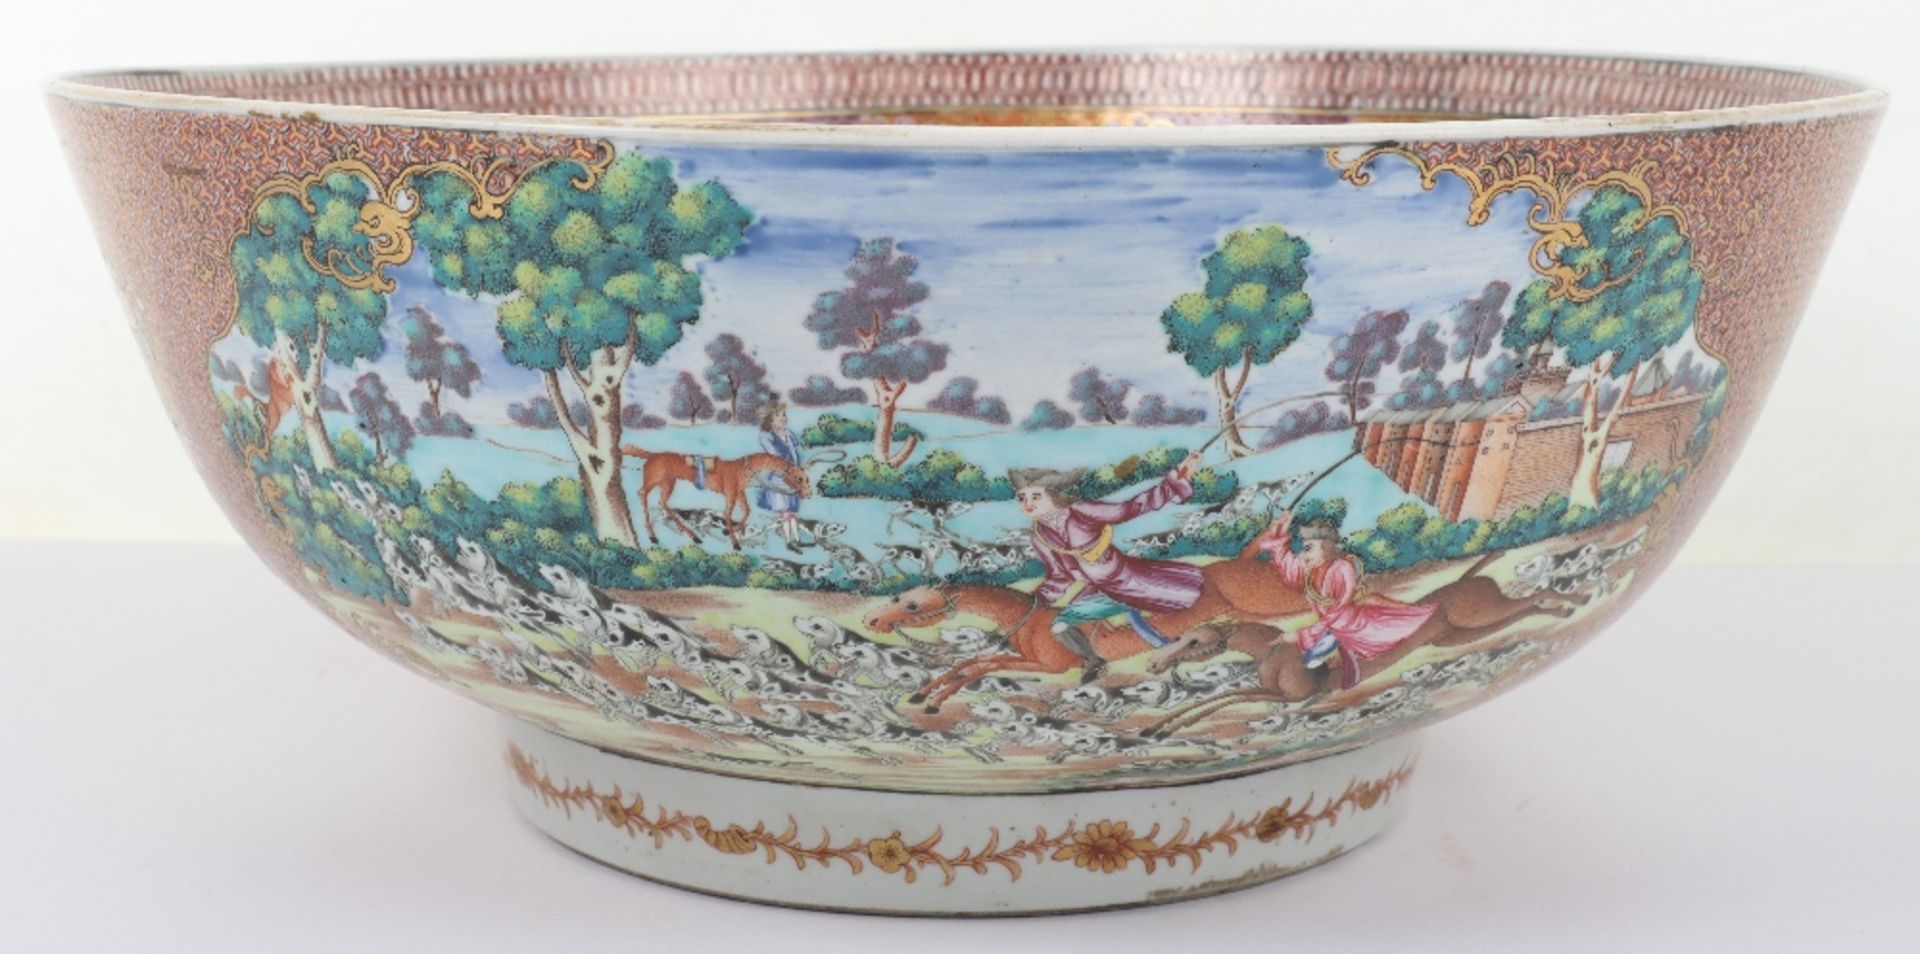 A rare substantial Chinese Mandarin palette famille rose punch bowl,